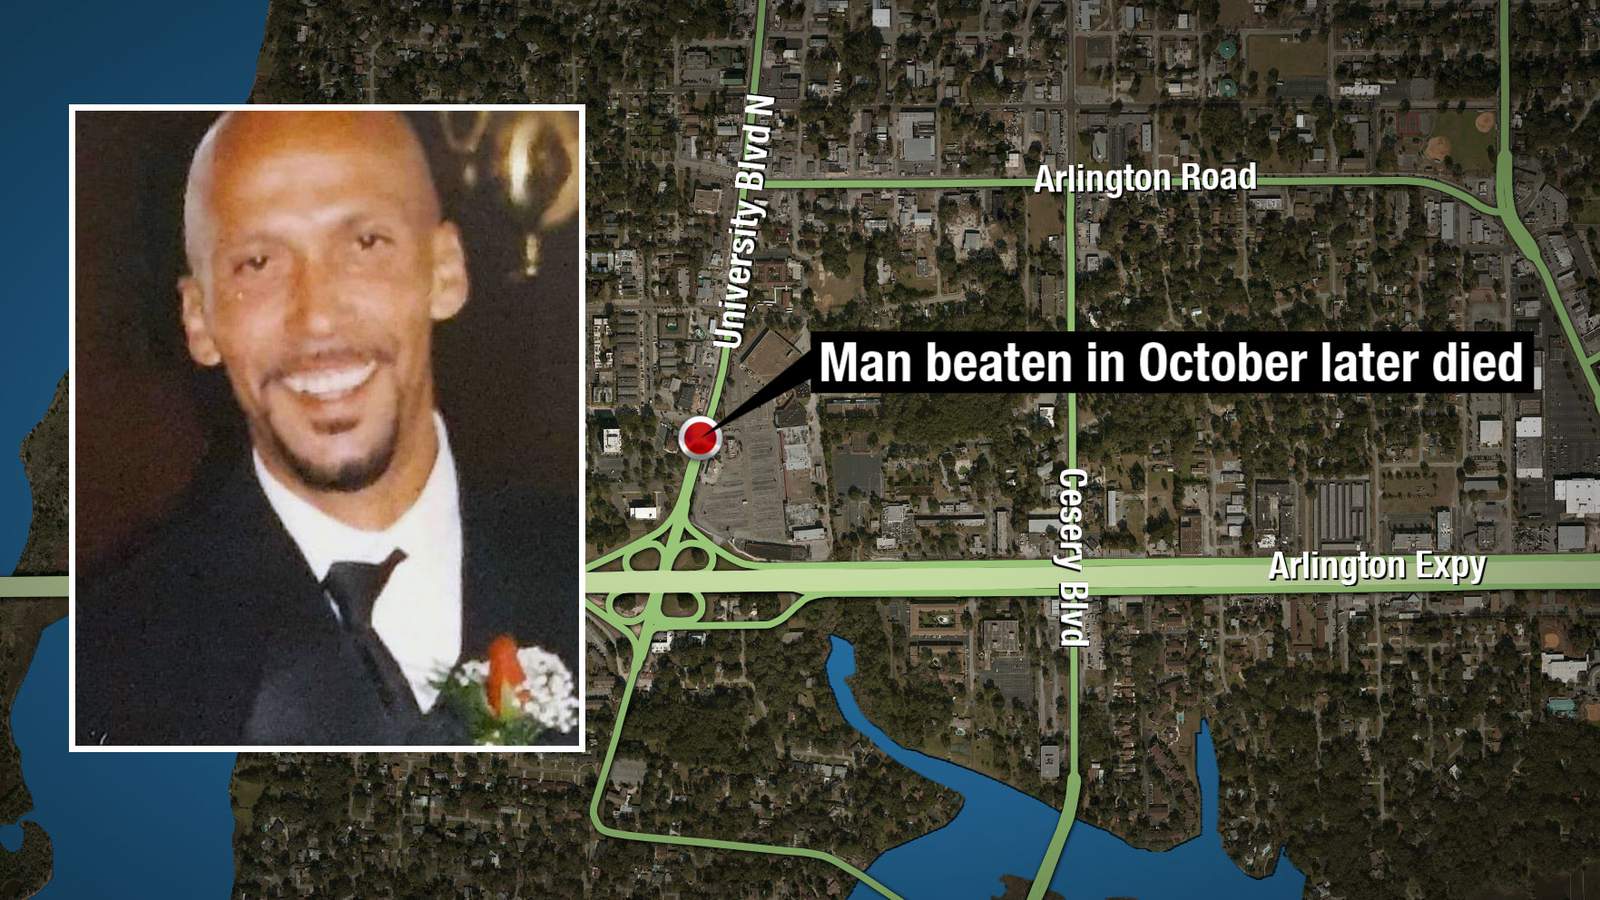 Police investigating death of man who was beaten in October